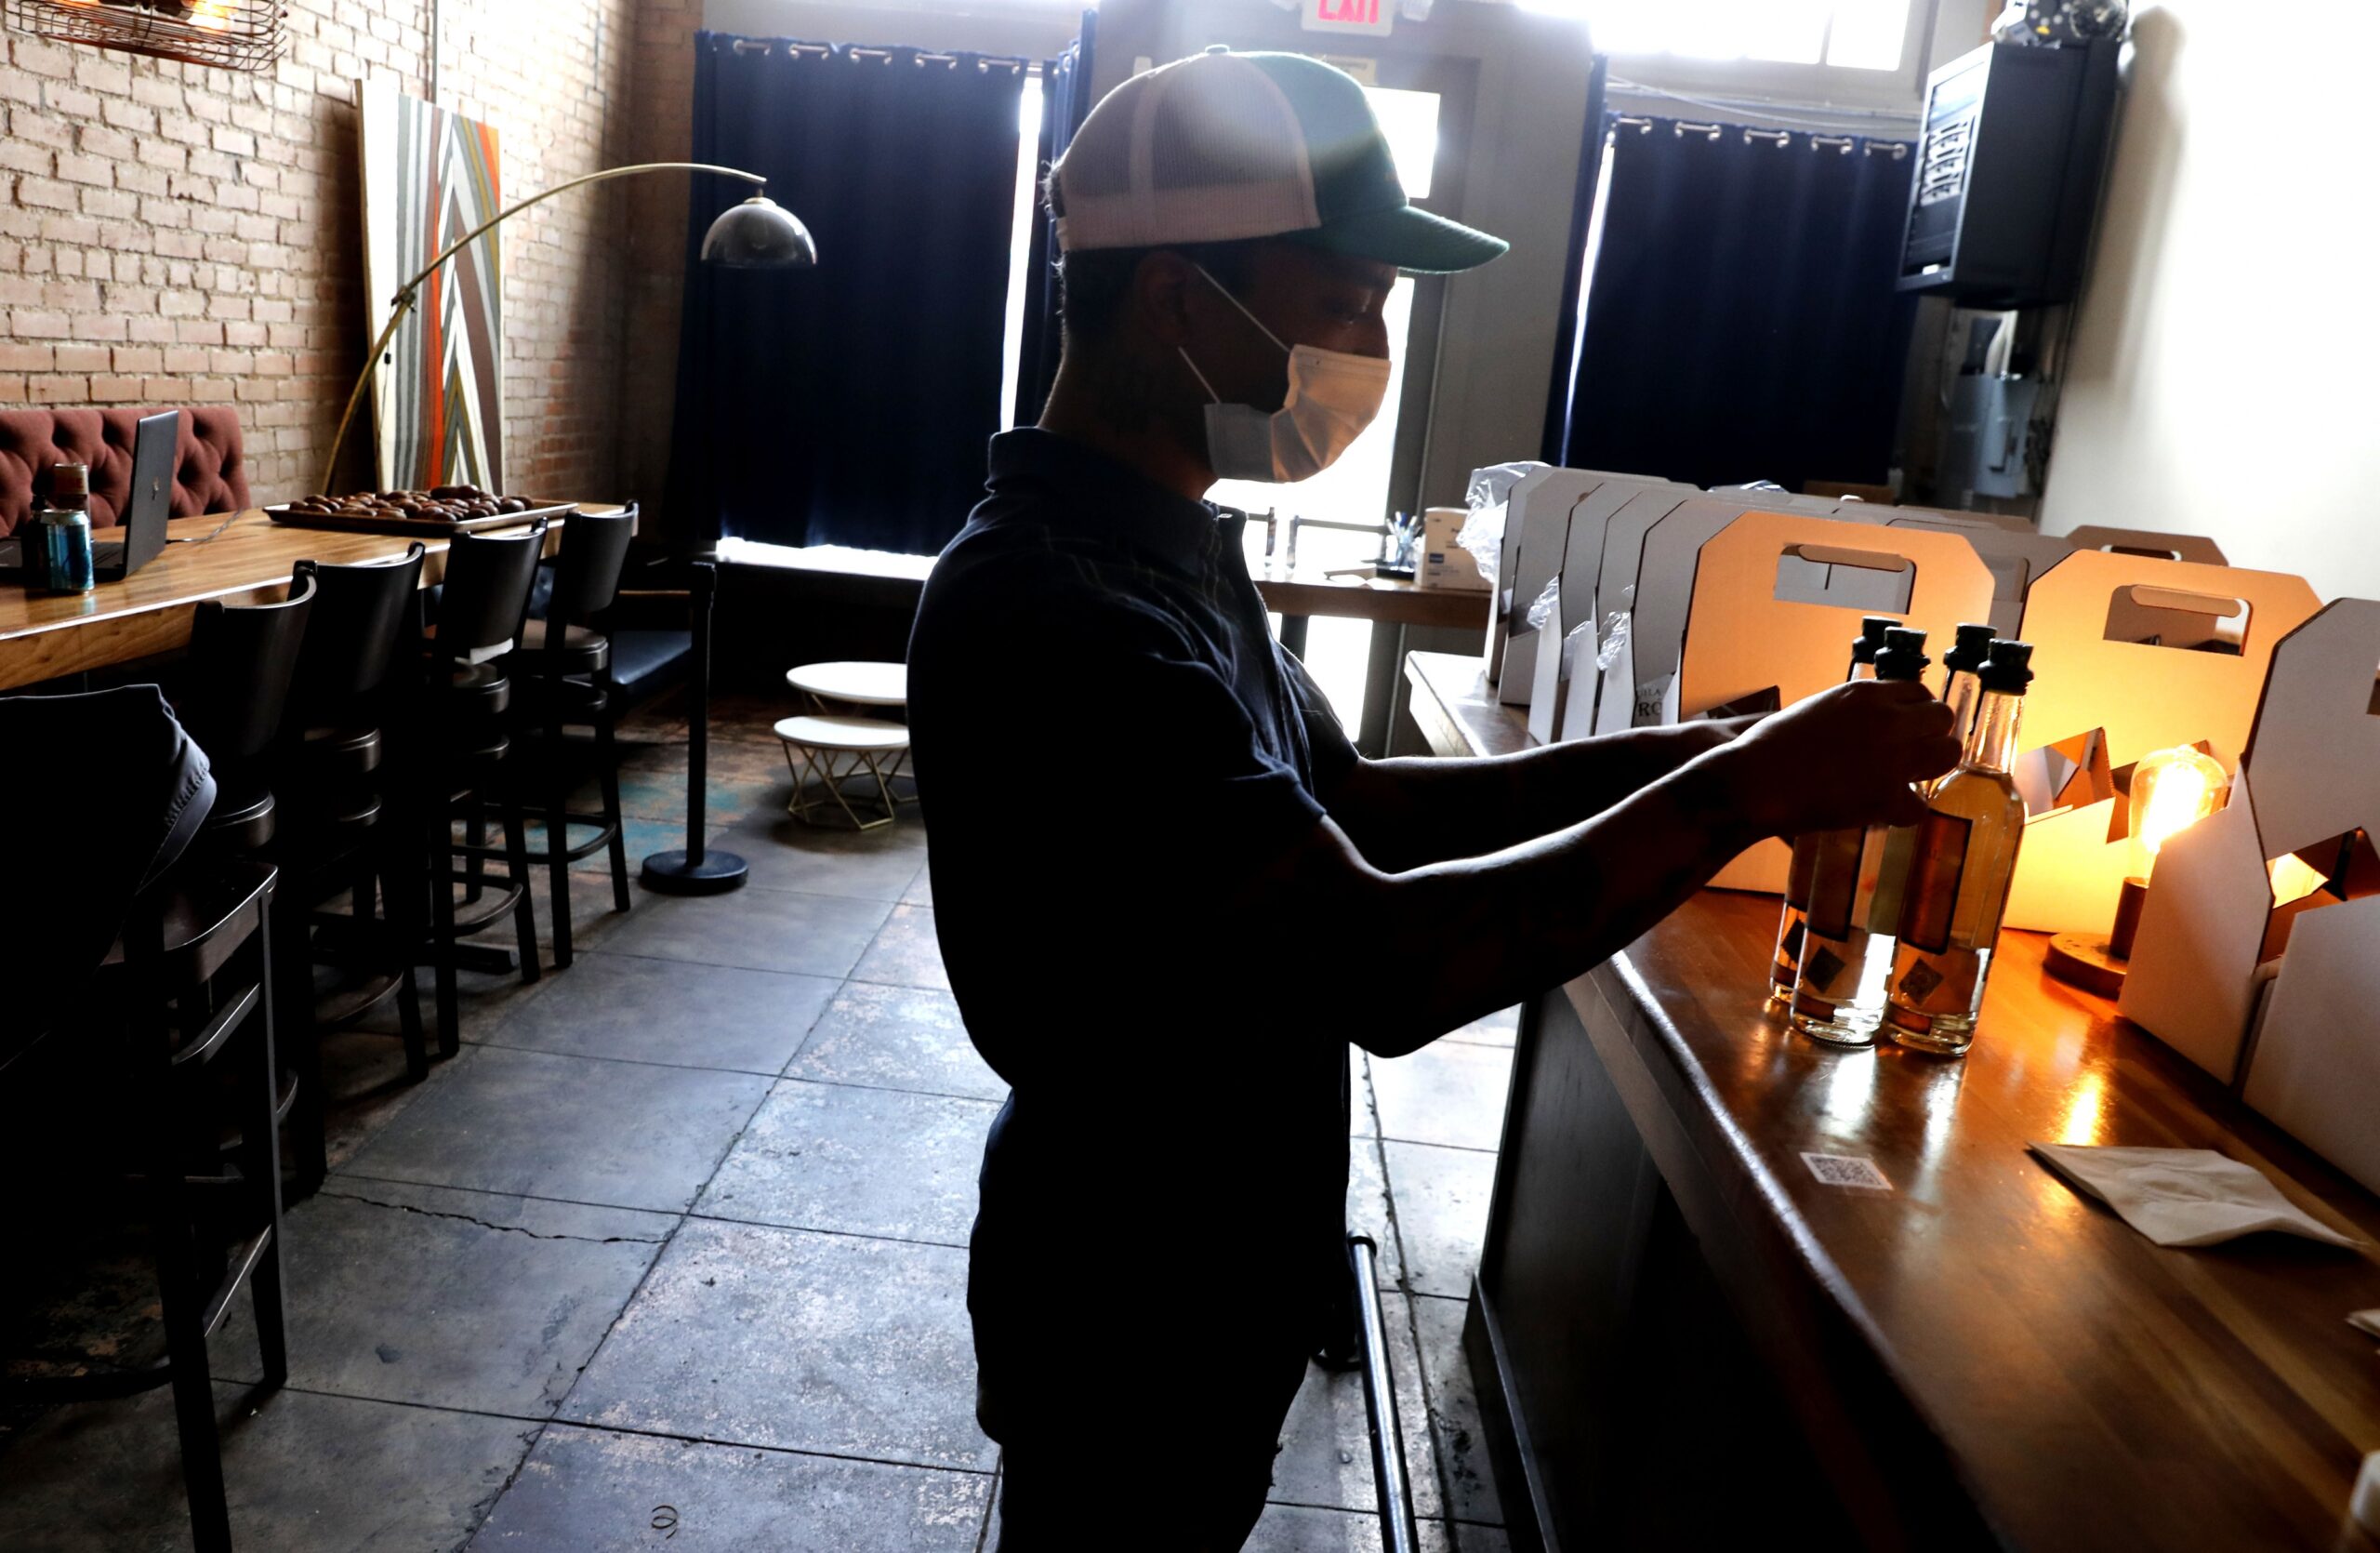 A man works in a restaurant during the COVID-19 pandemic